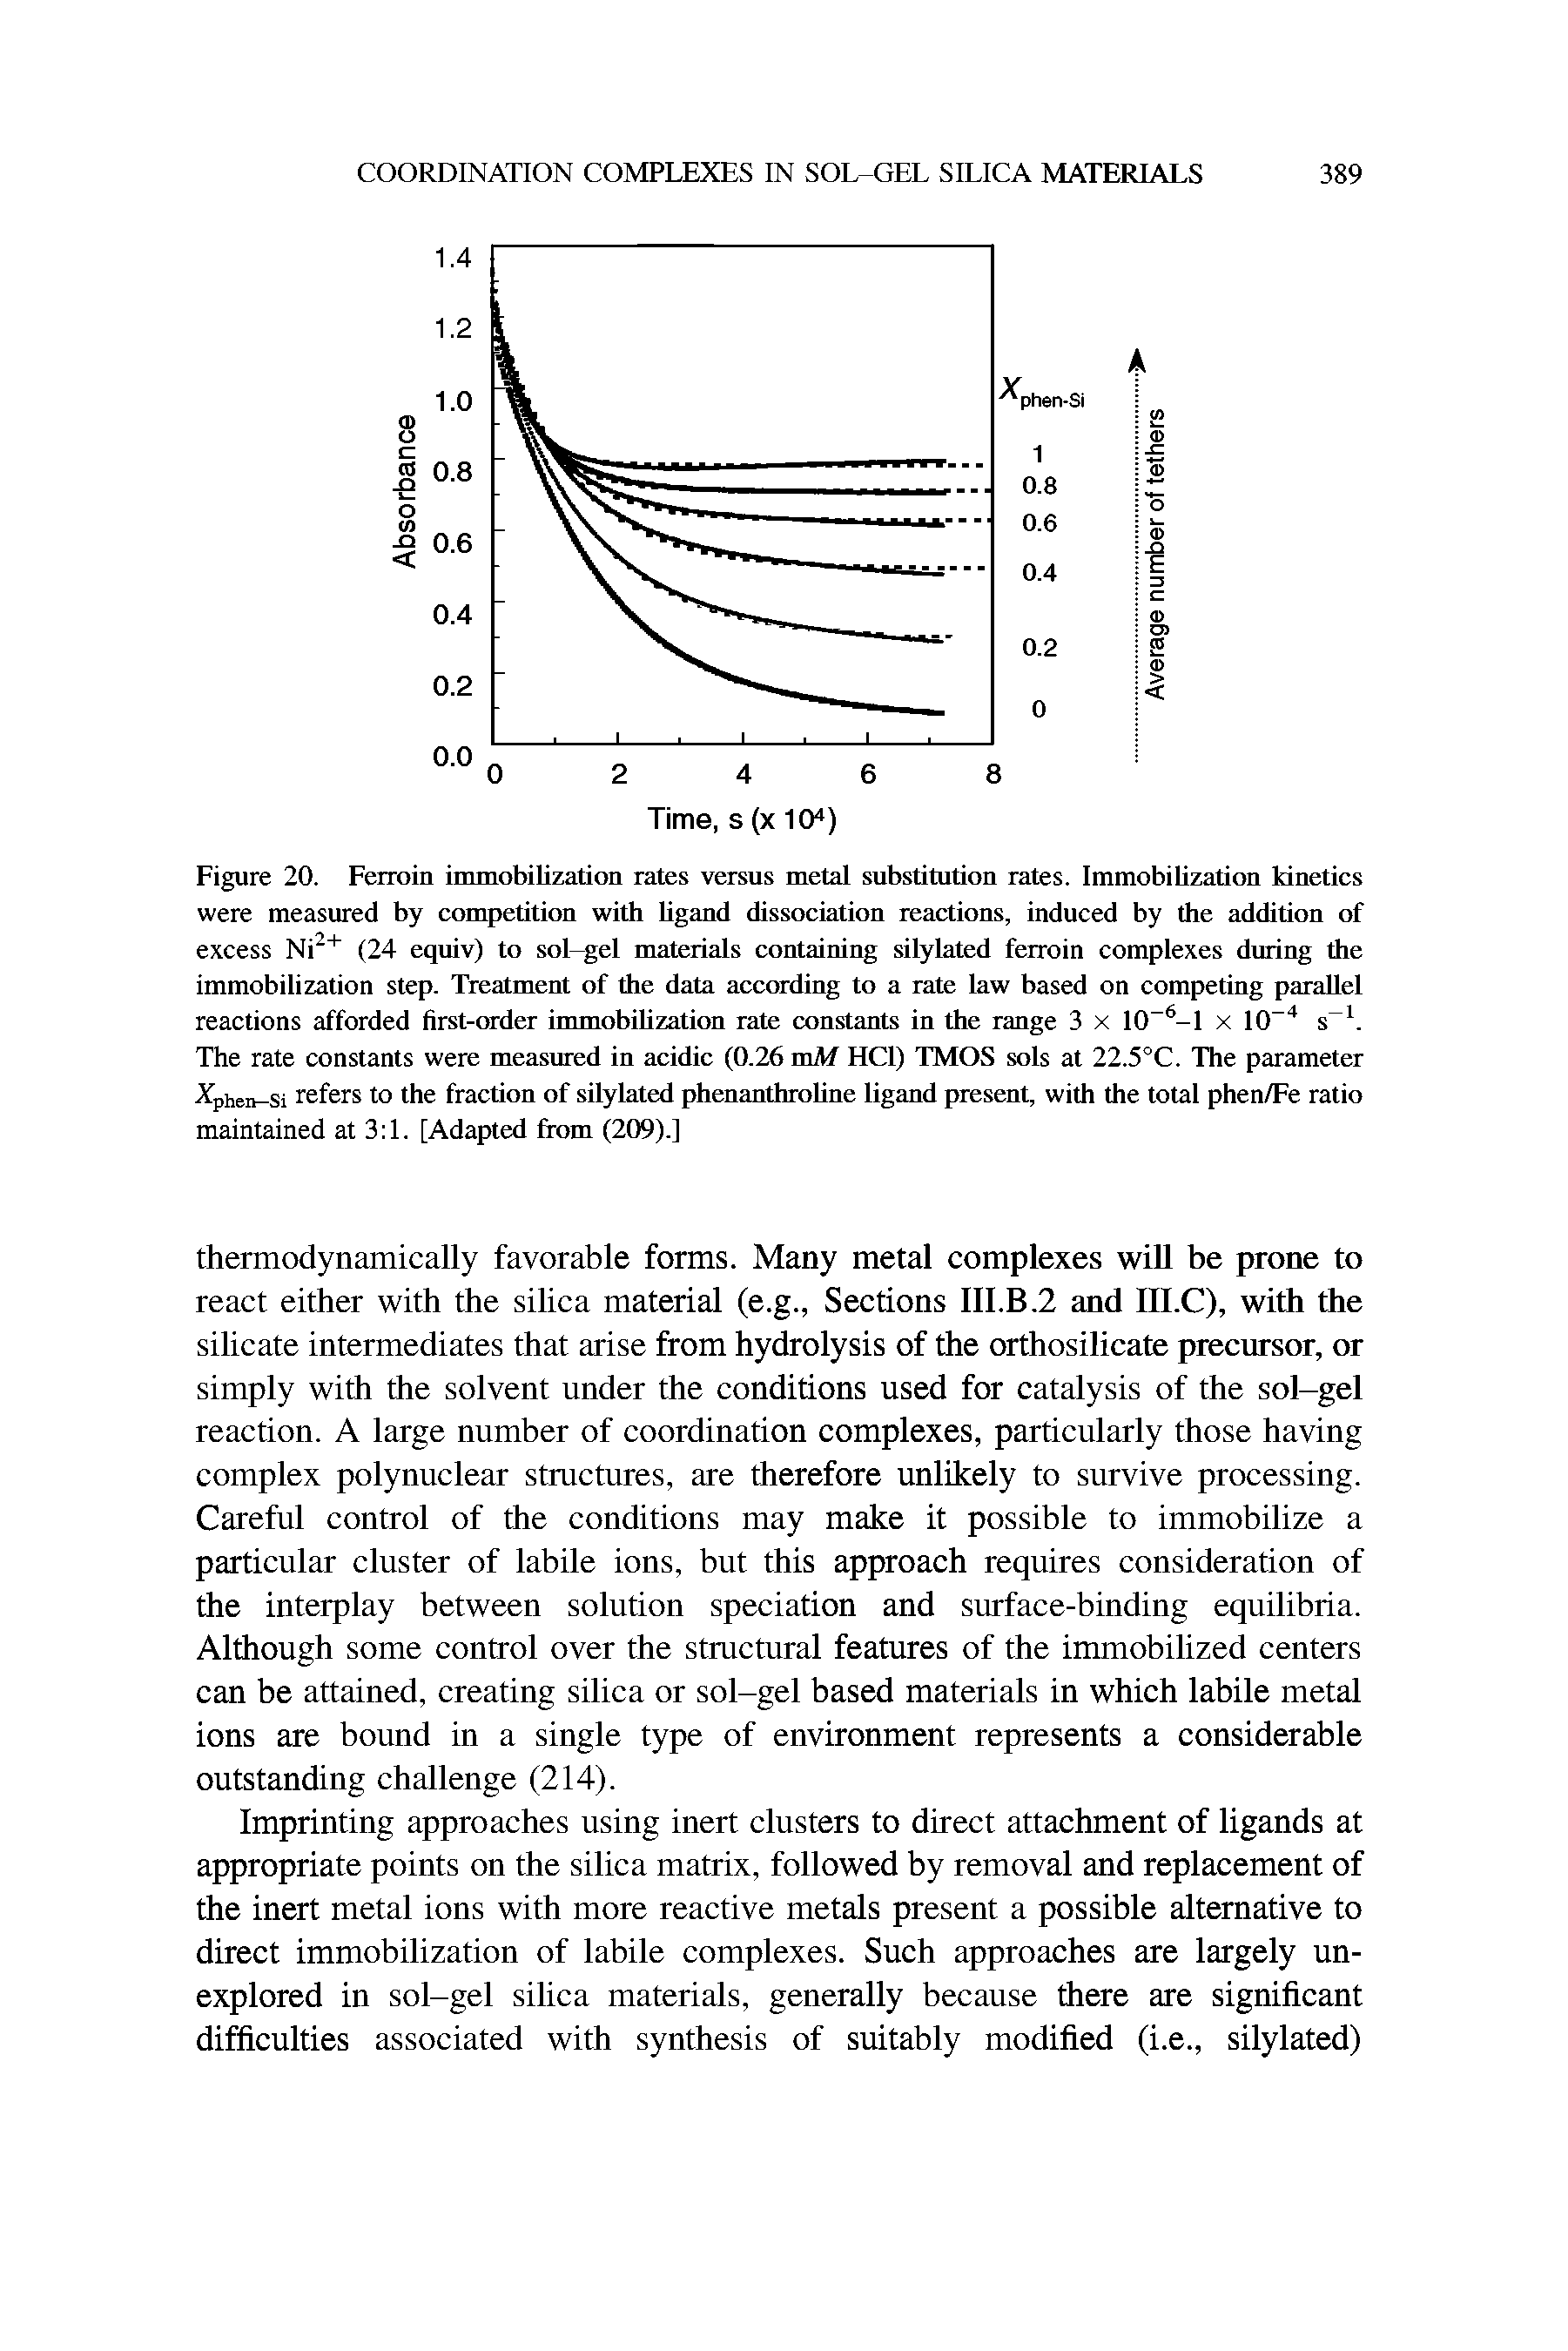 Figure 20. Feixoin immobilization rates versus metal substitution rates. Immobilization kinetics were measured by competition with ligand dissociation reactions, induced by the addition of excess Ni (24 equiv) to sol—gel materials containing silylated ferroin complexes during the immobilization step. Treatment of the data according to a rate law based on competing parallel reactions afforded first-order immobilization rate constants in the range 3 x X 10- ...